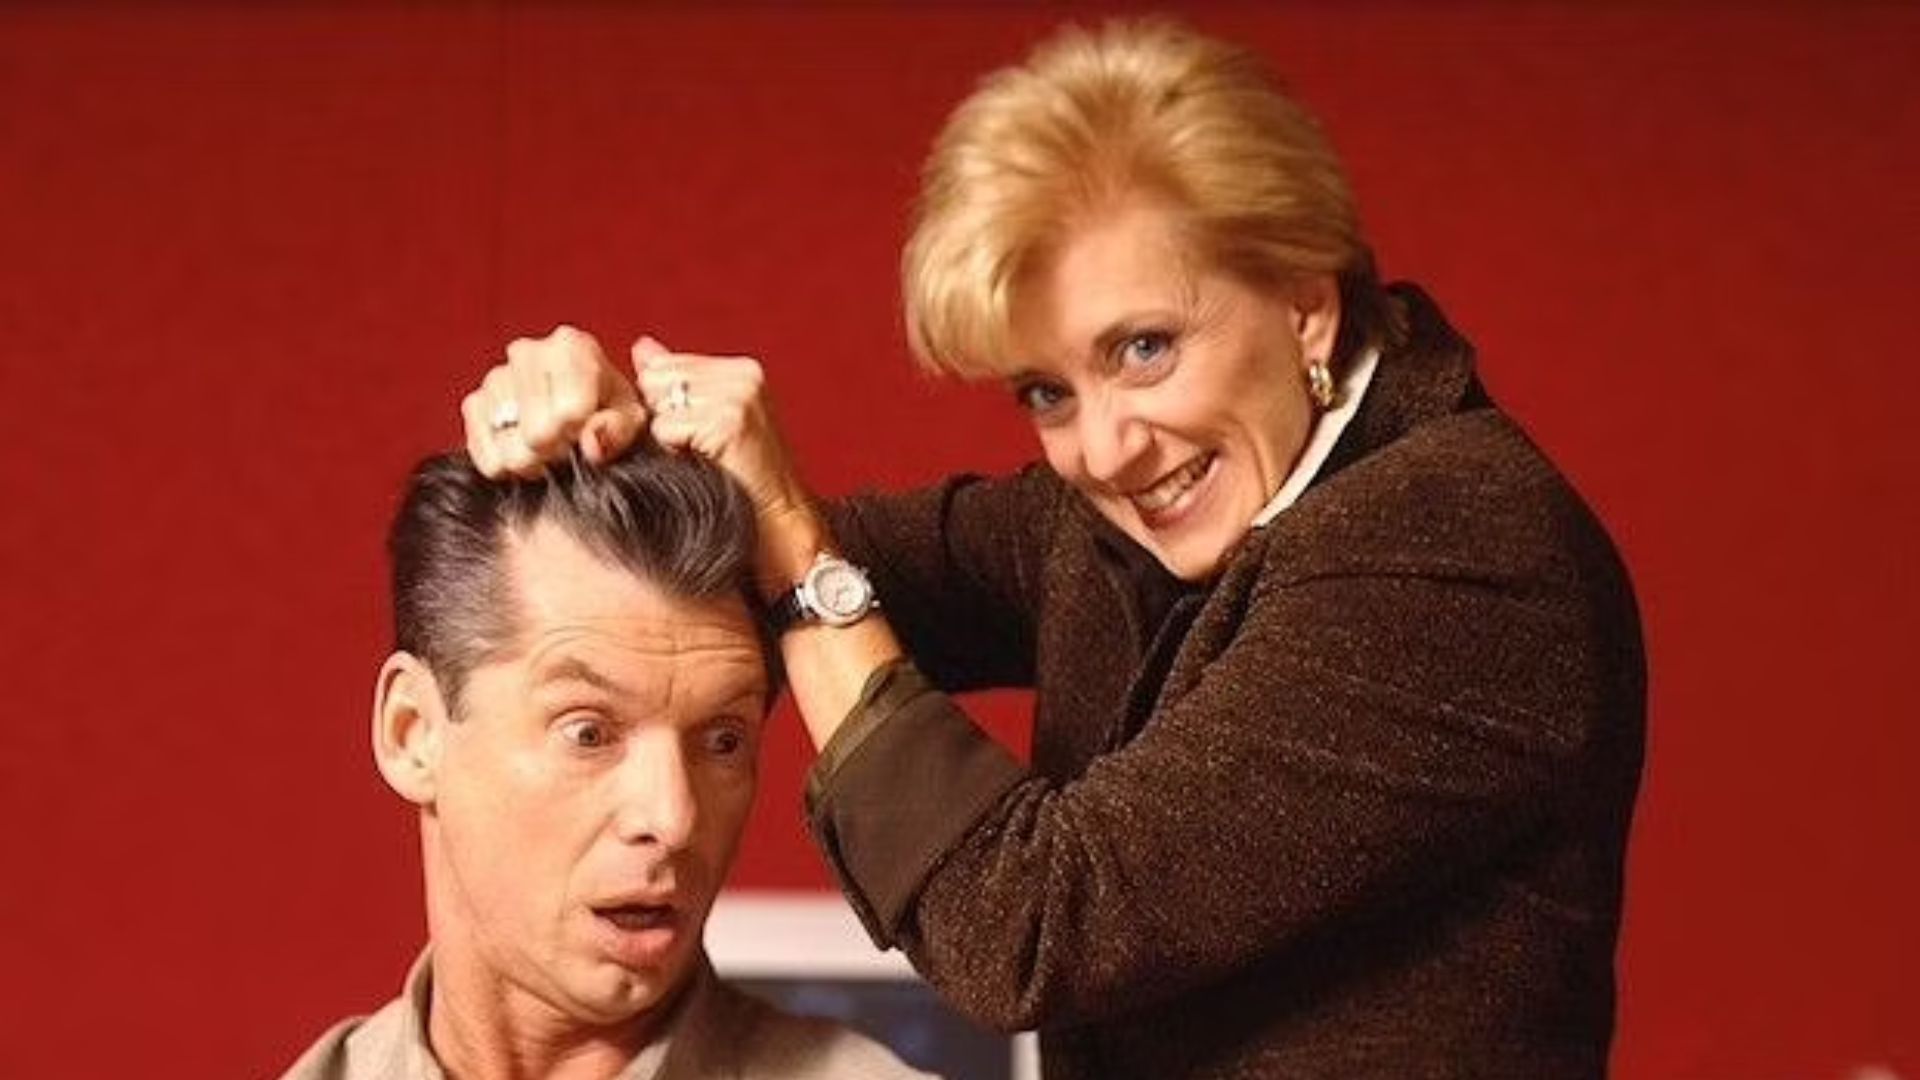 Vince McMahon was cheating on Linda McMahon with Trish Stratus in the lead up to Wrestlemania 17.